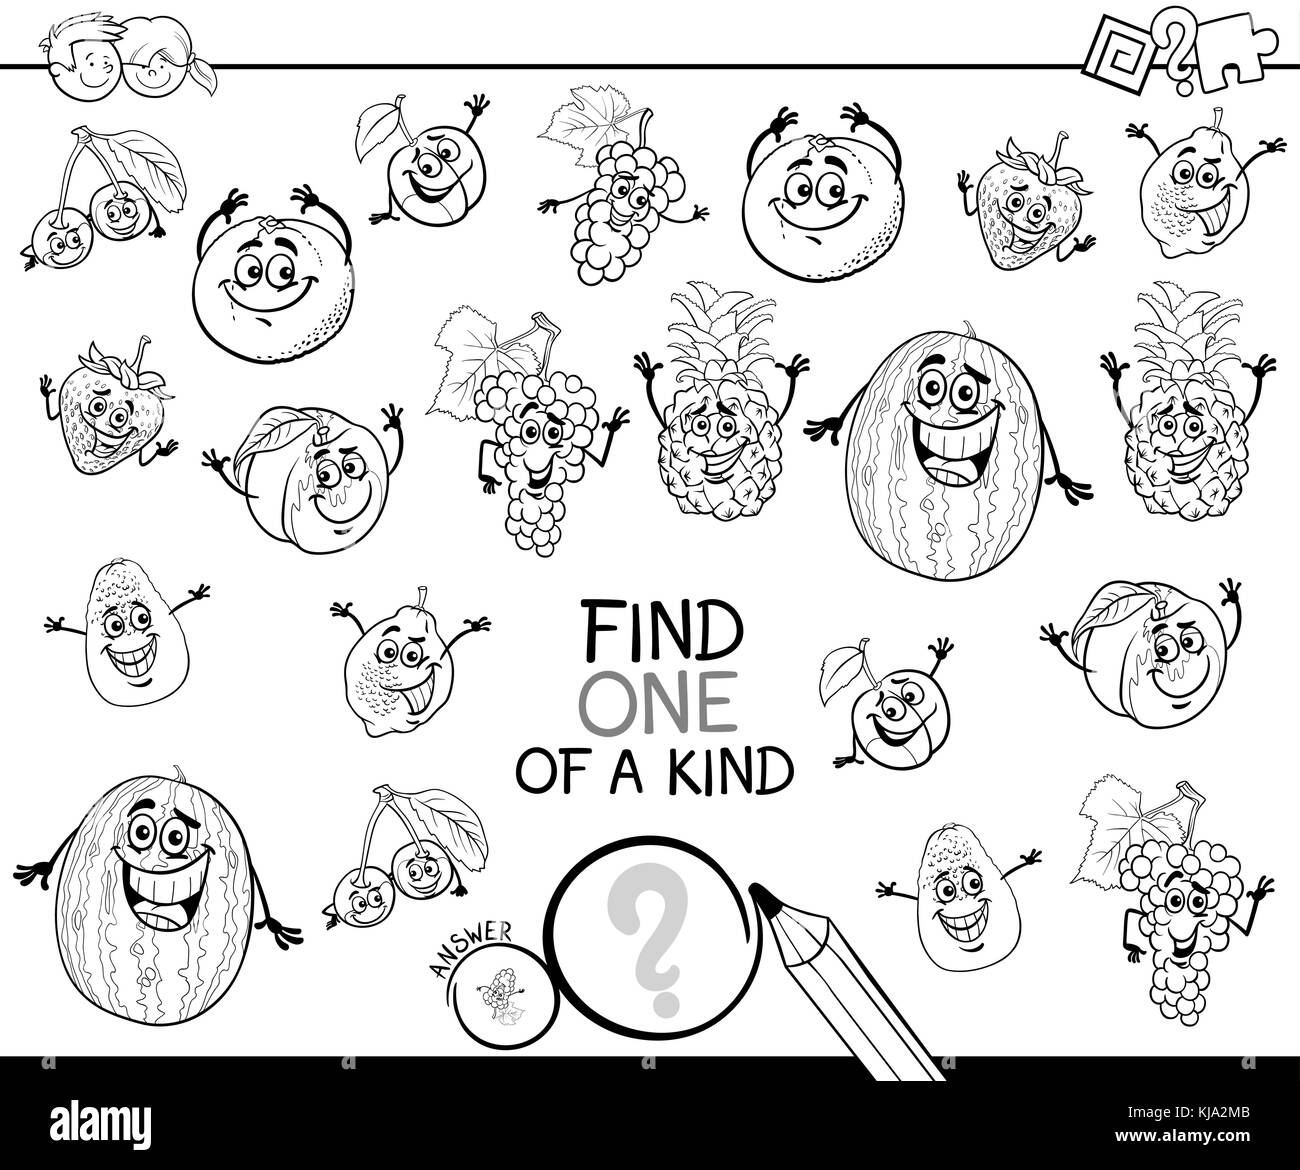 Black and White Cartoon Illustration of Find One of a Kind Educational Activity Game for Children with Fruits Funny Characters Coloring Book Stock Vector